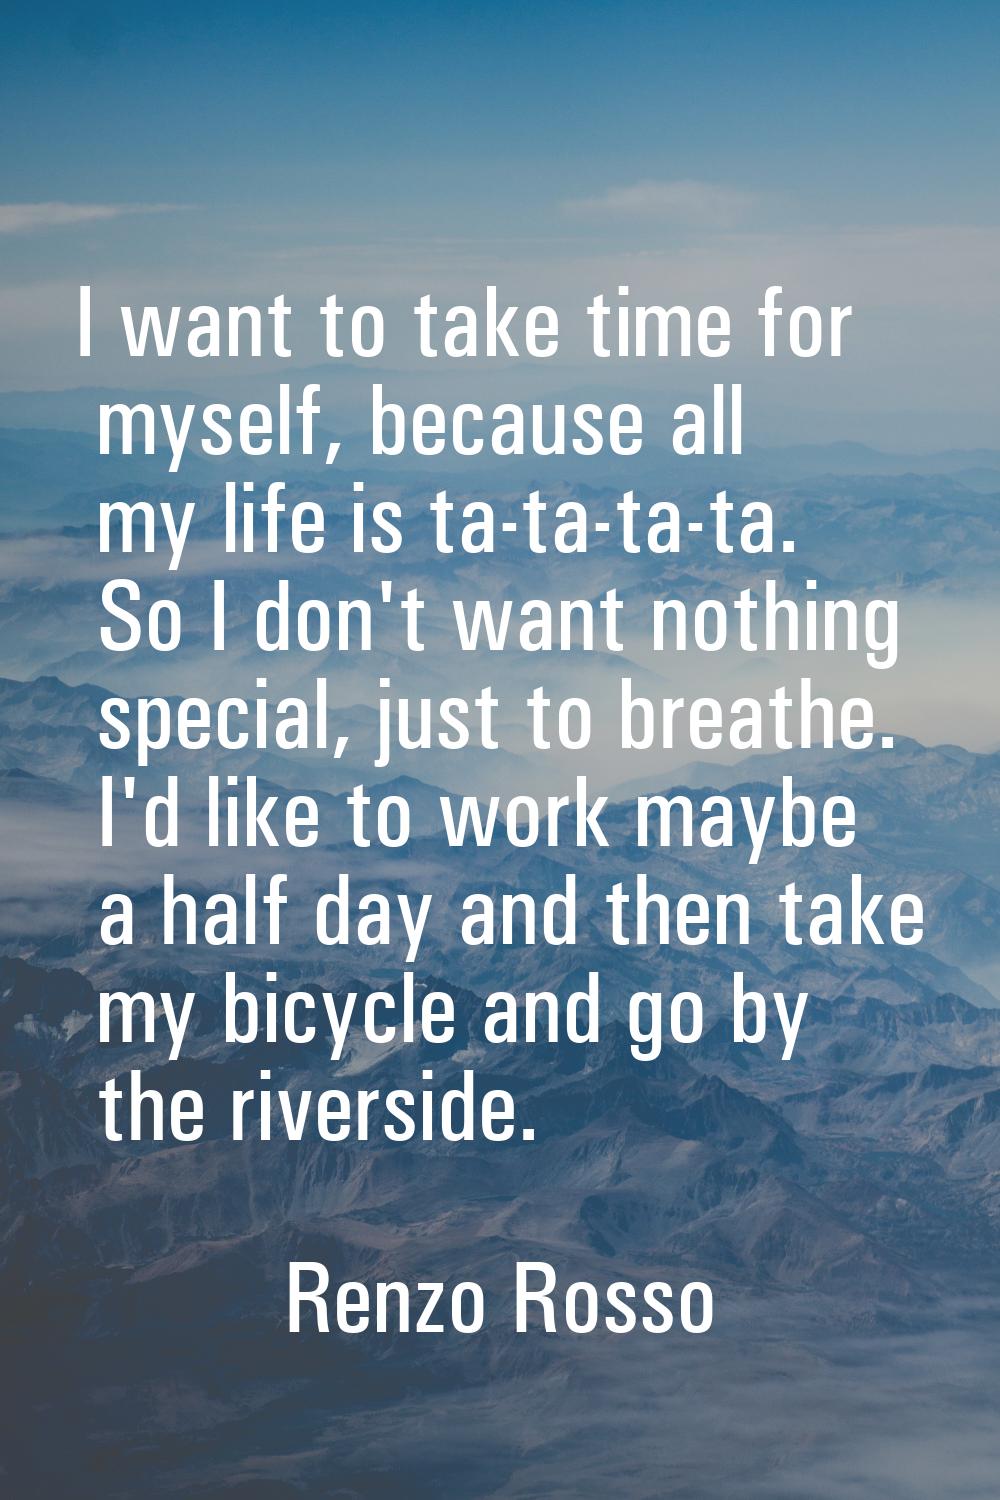 I want to take time for myself, because all my life is ta-ta-ta-ta. So I don't want nothing special